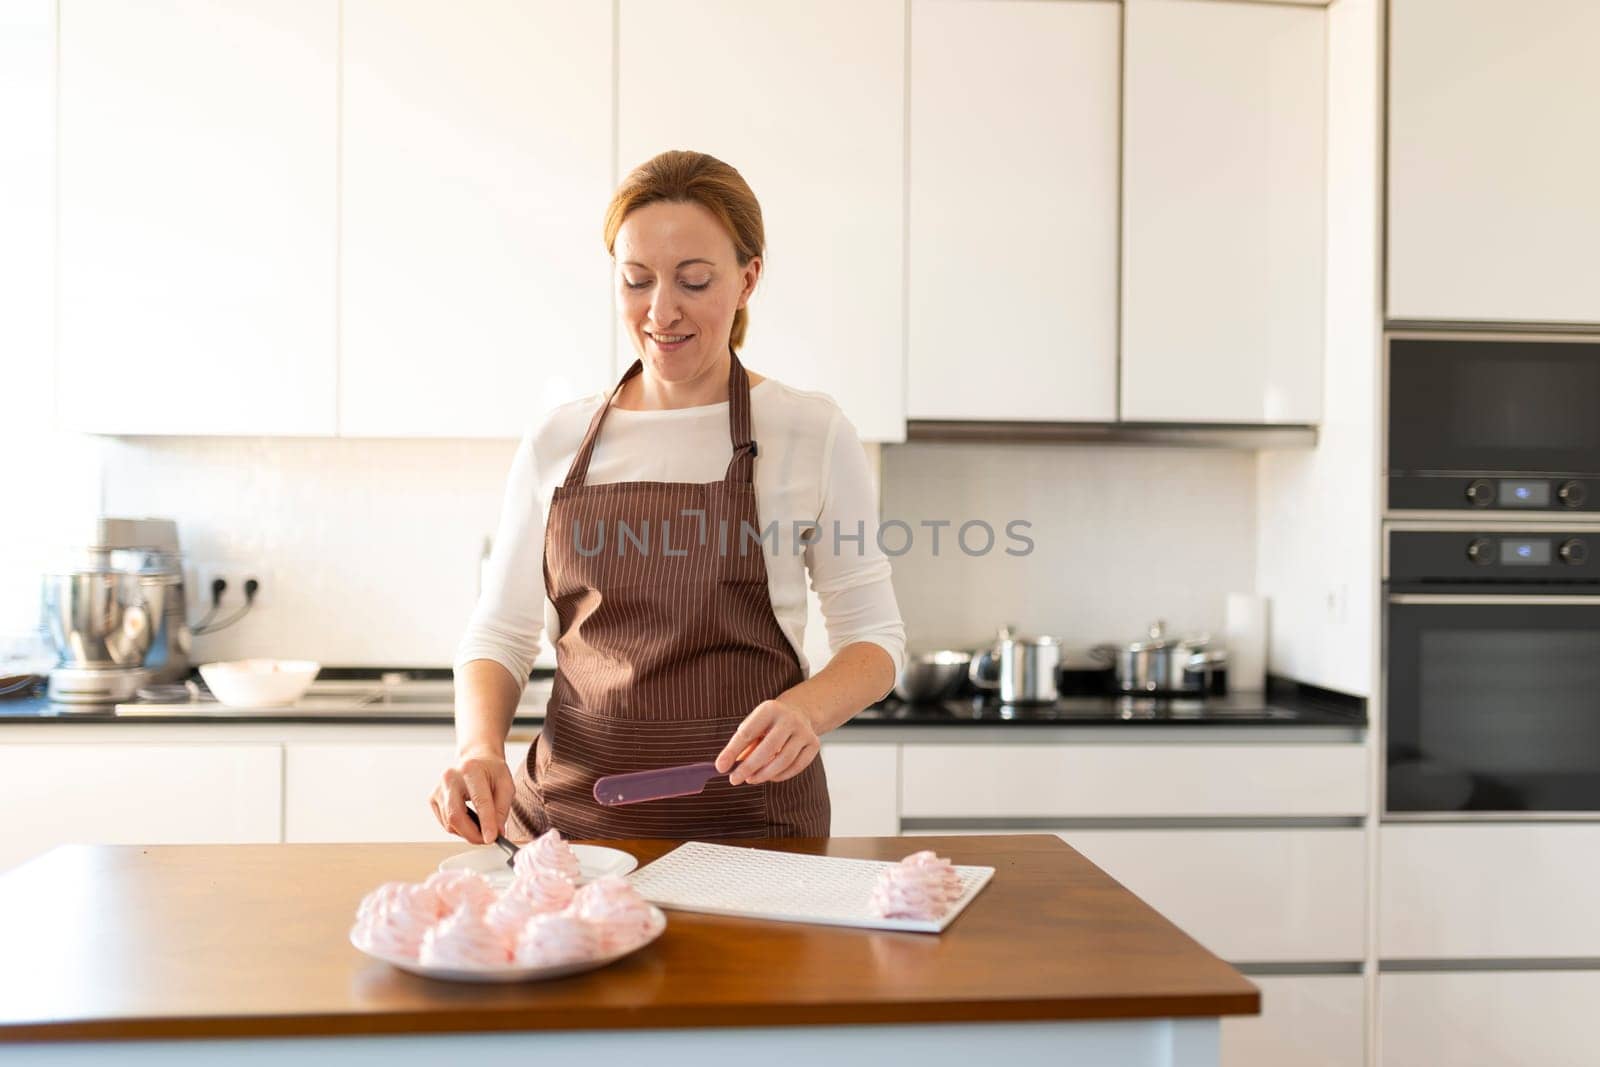 A woman is cutting a dessert on a wooden table. She is wearing an apron and a brown shirt. The dessert is a pastry, and there are several of them on the table